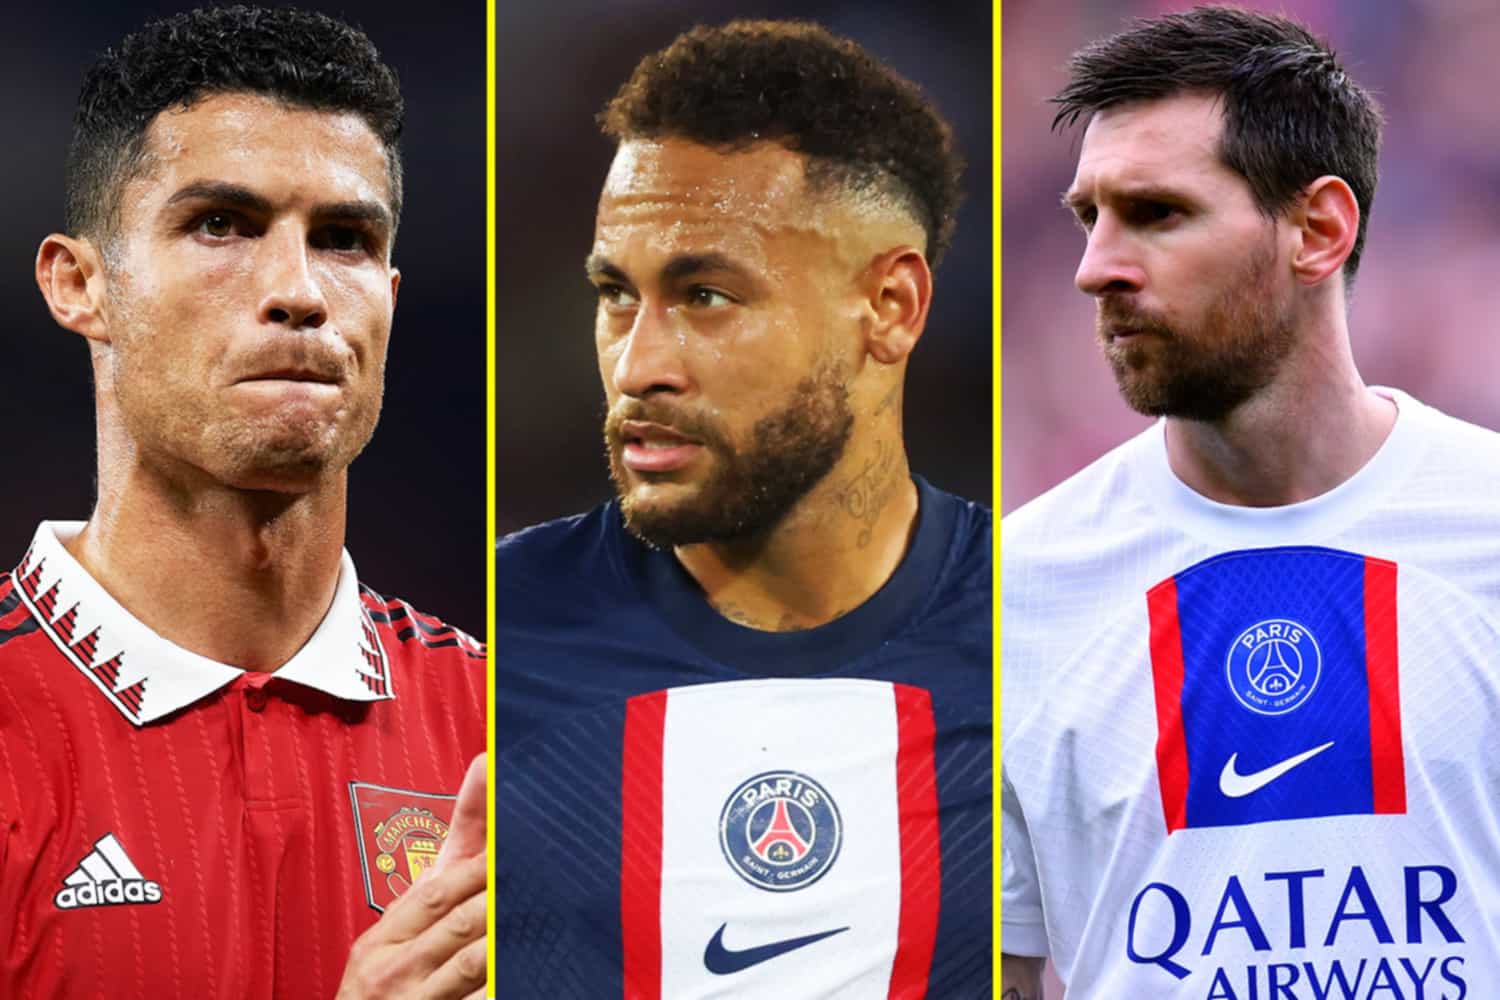 Neymar gives one-word assessment on Harry Kane, Lionel Messi, and Cristiano Ronaldo as he hails wonderkid Pedri ‘like Andres Iniesta’